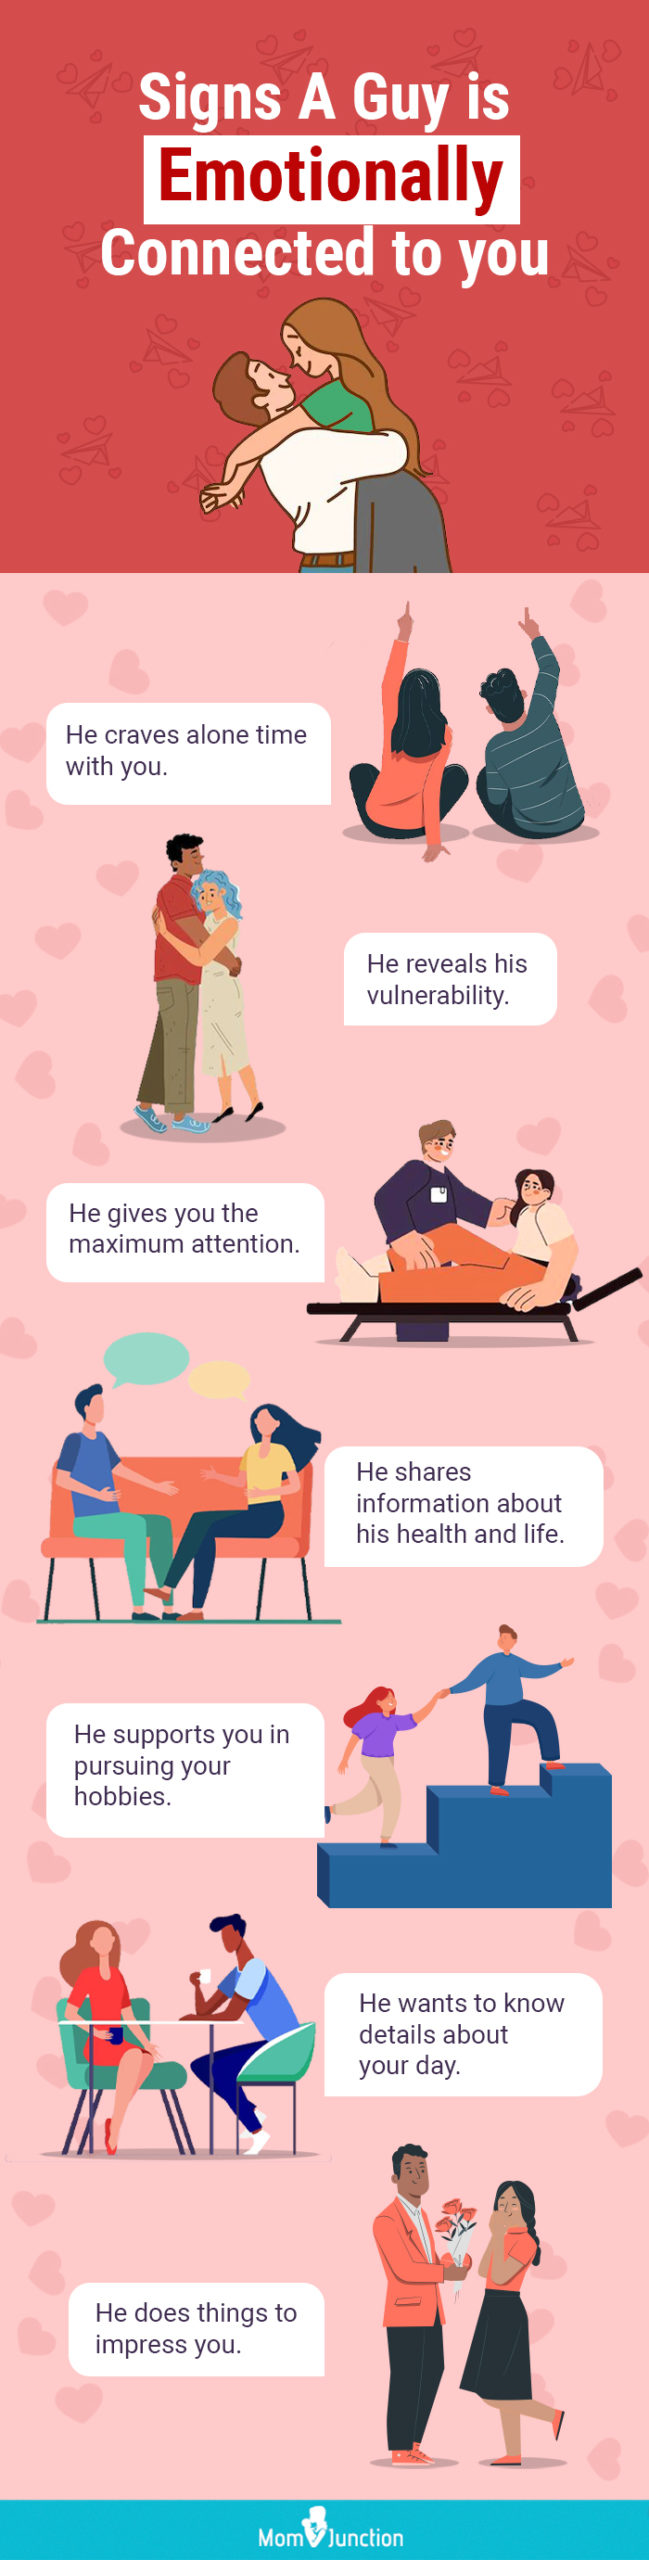 indicators of a guy emotionally connected to you [infographic]